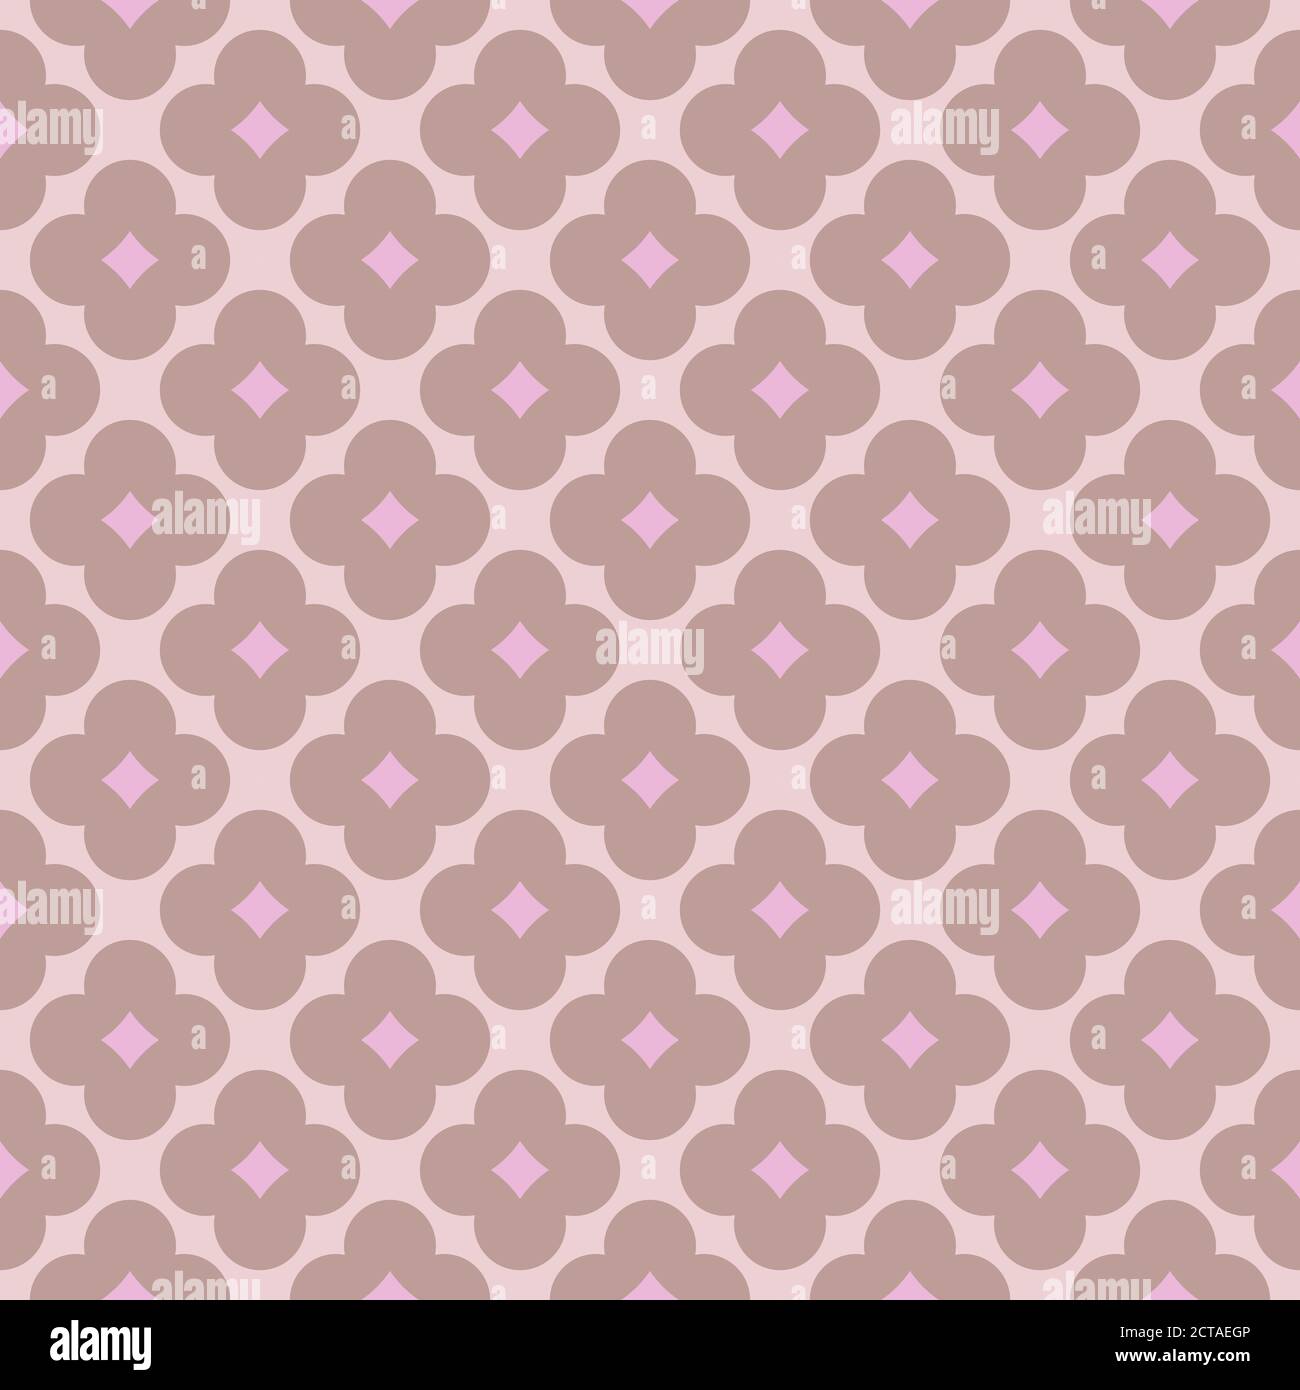 Seamless geometric pattern, simple elegant classic fashion design in pale taupe and pink colors. Vector illustration. Design for wallpaper, textile, fabric, wrapping paper. Stock Vector